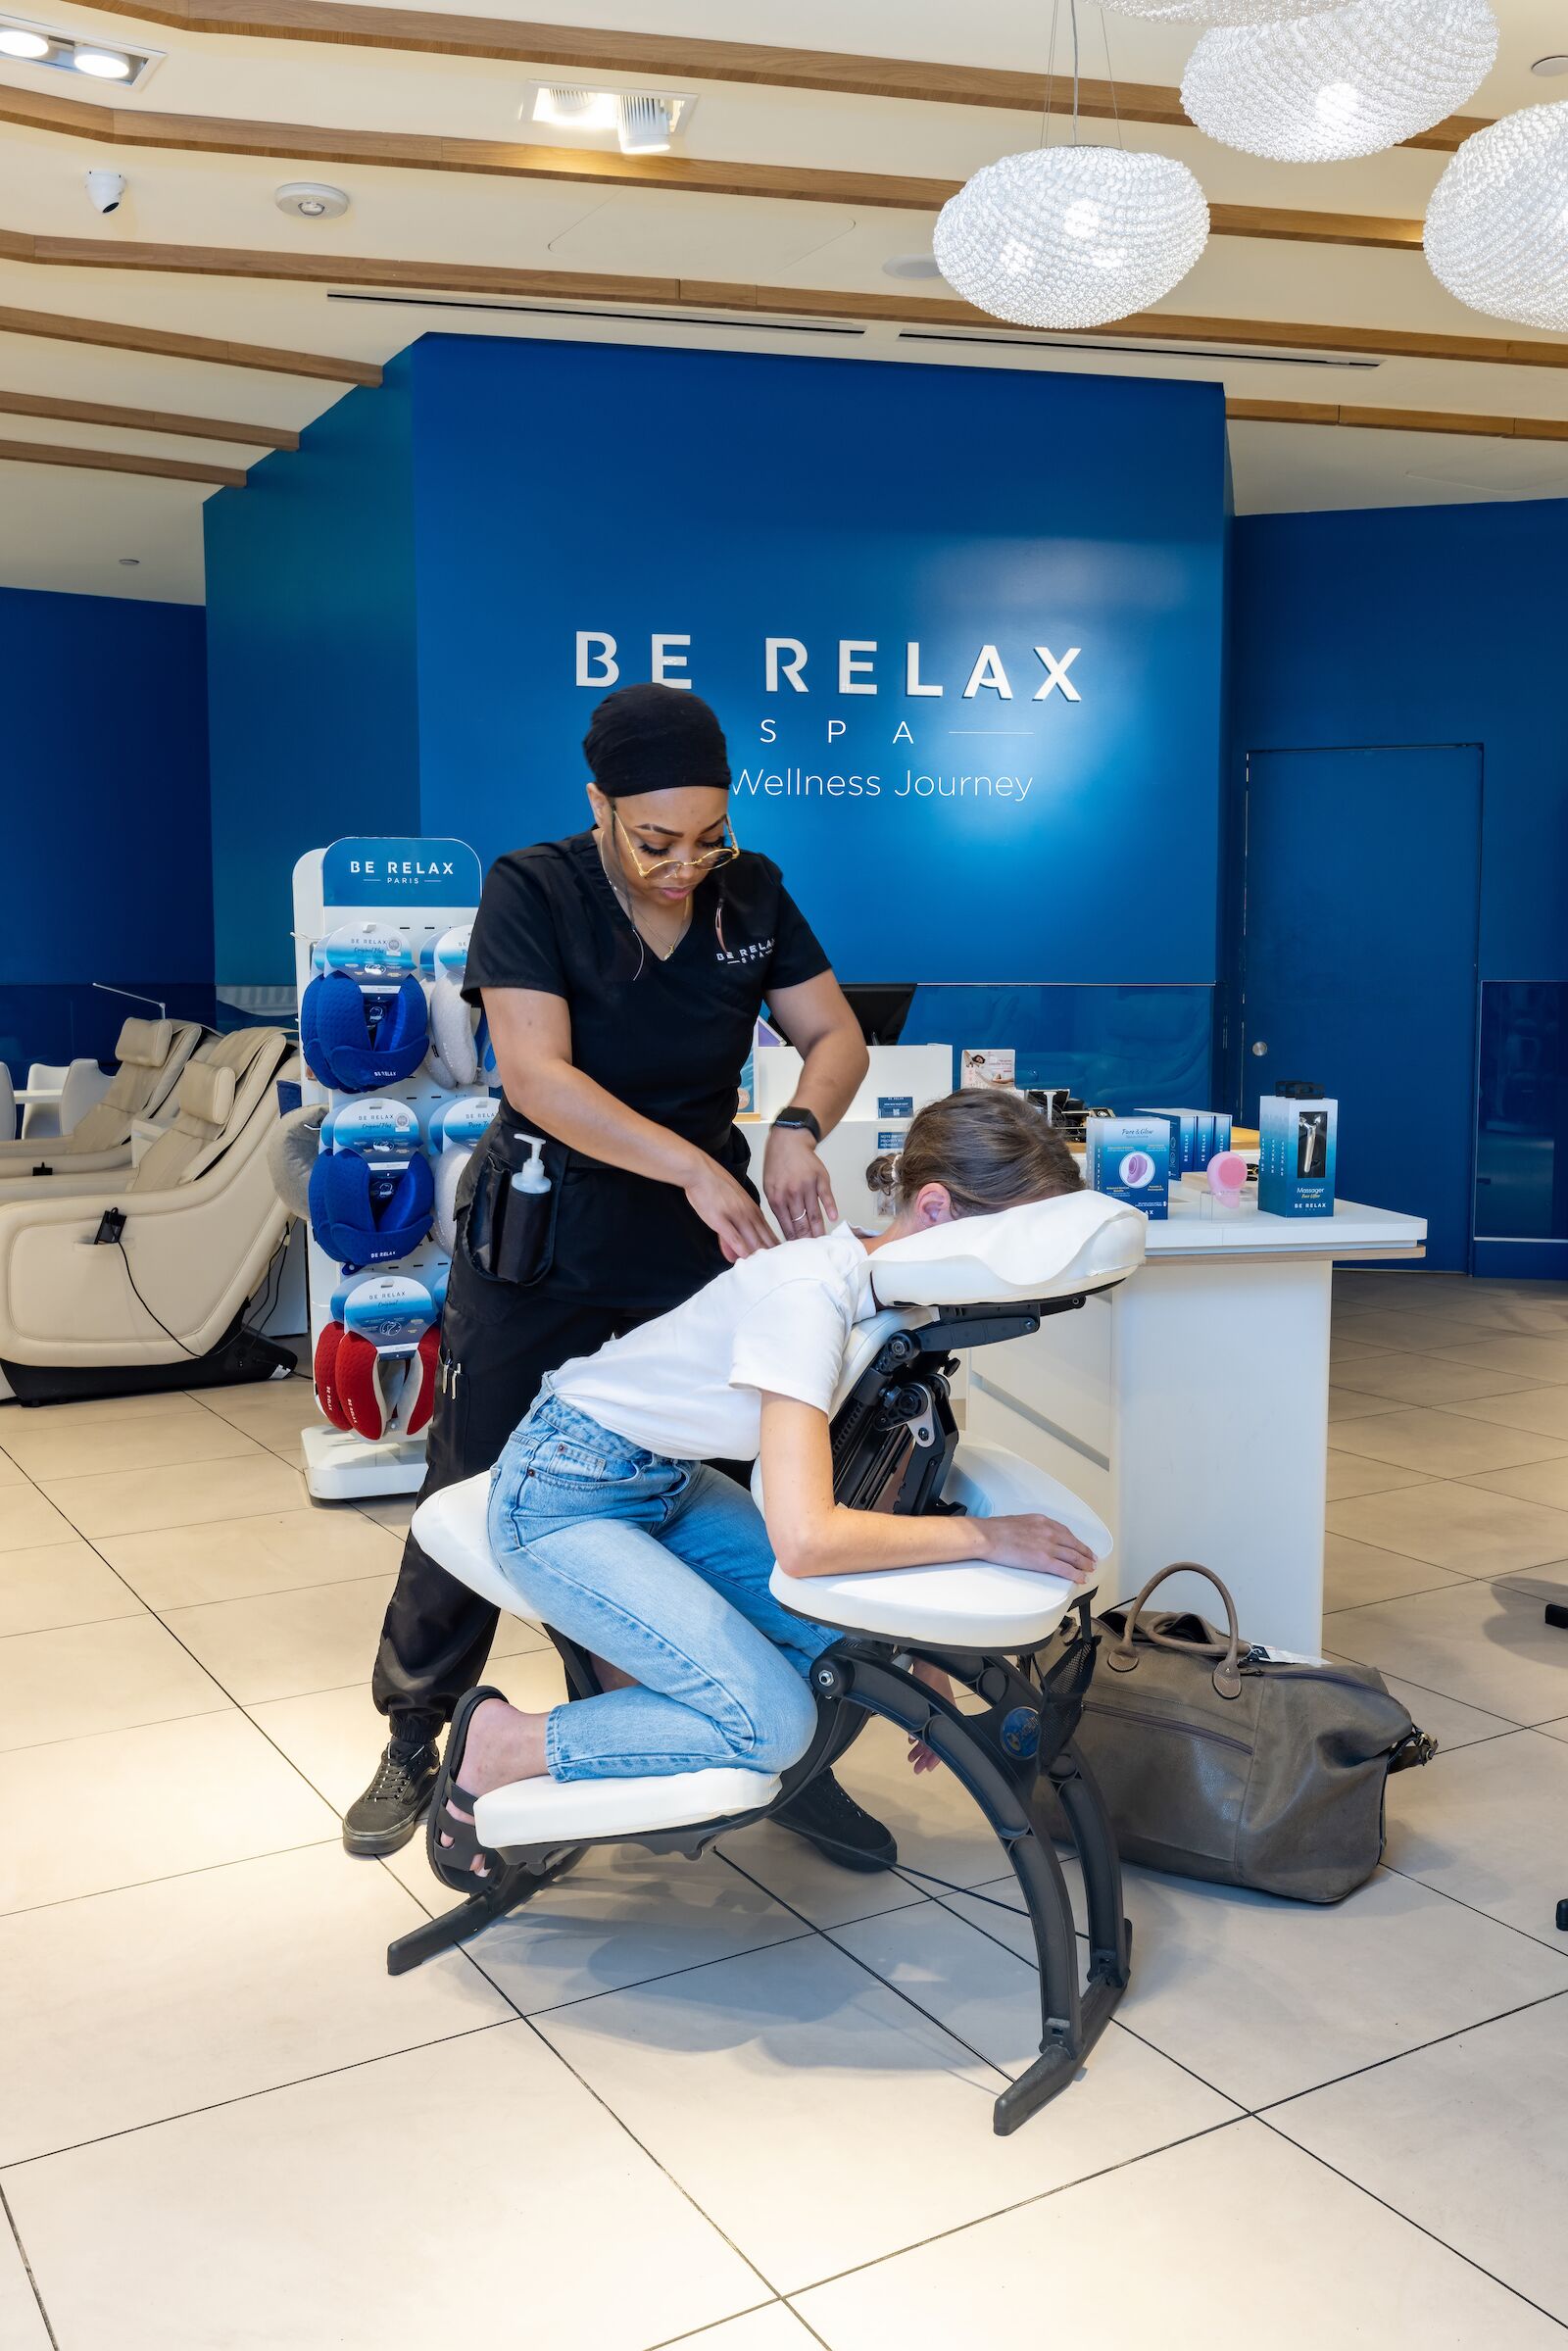 Be Relax spa, where you can get body treatments and massages, are in many airports around the world